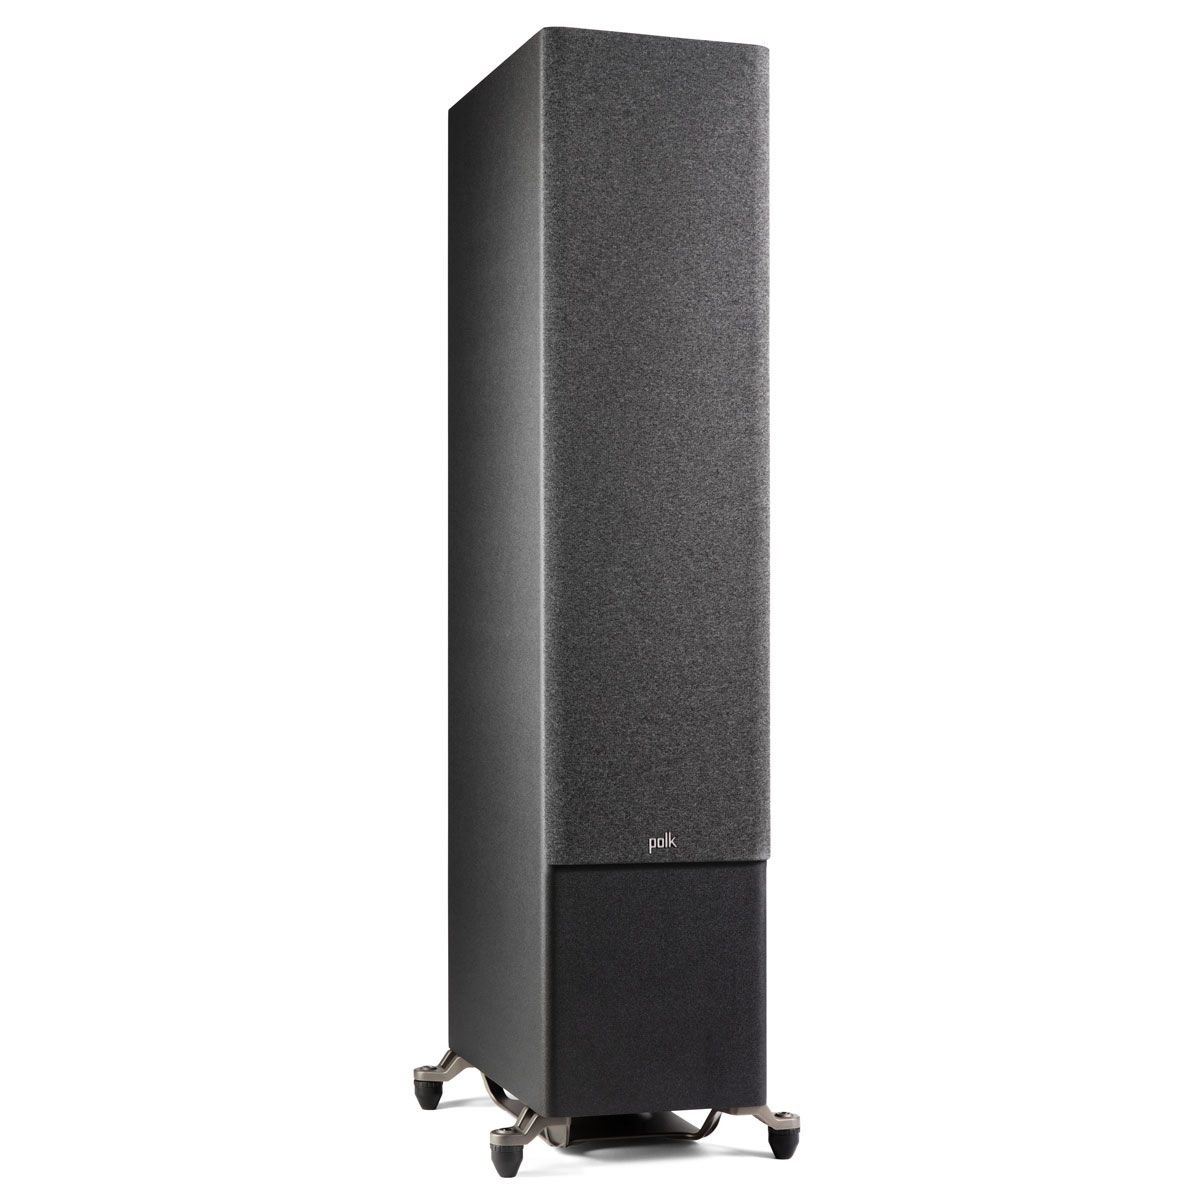 Polk Audio Reserve R700 Floorstanding Speaker, Black, front right angle with grille